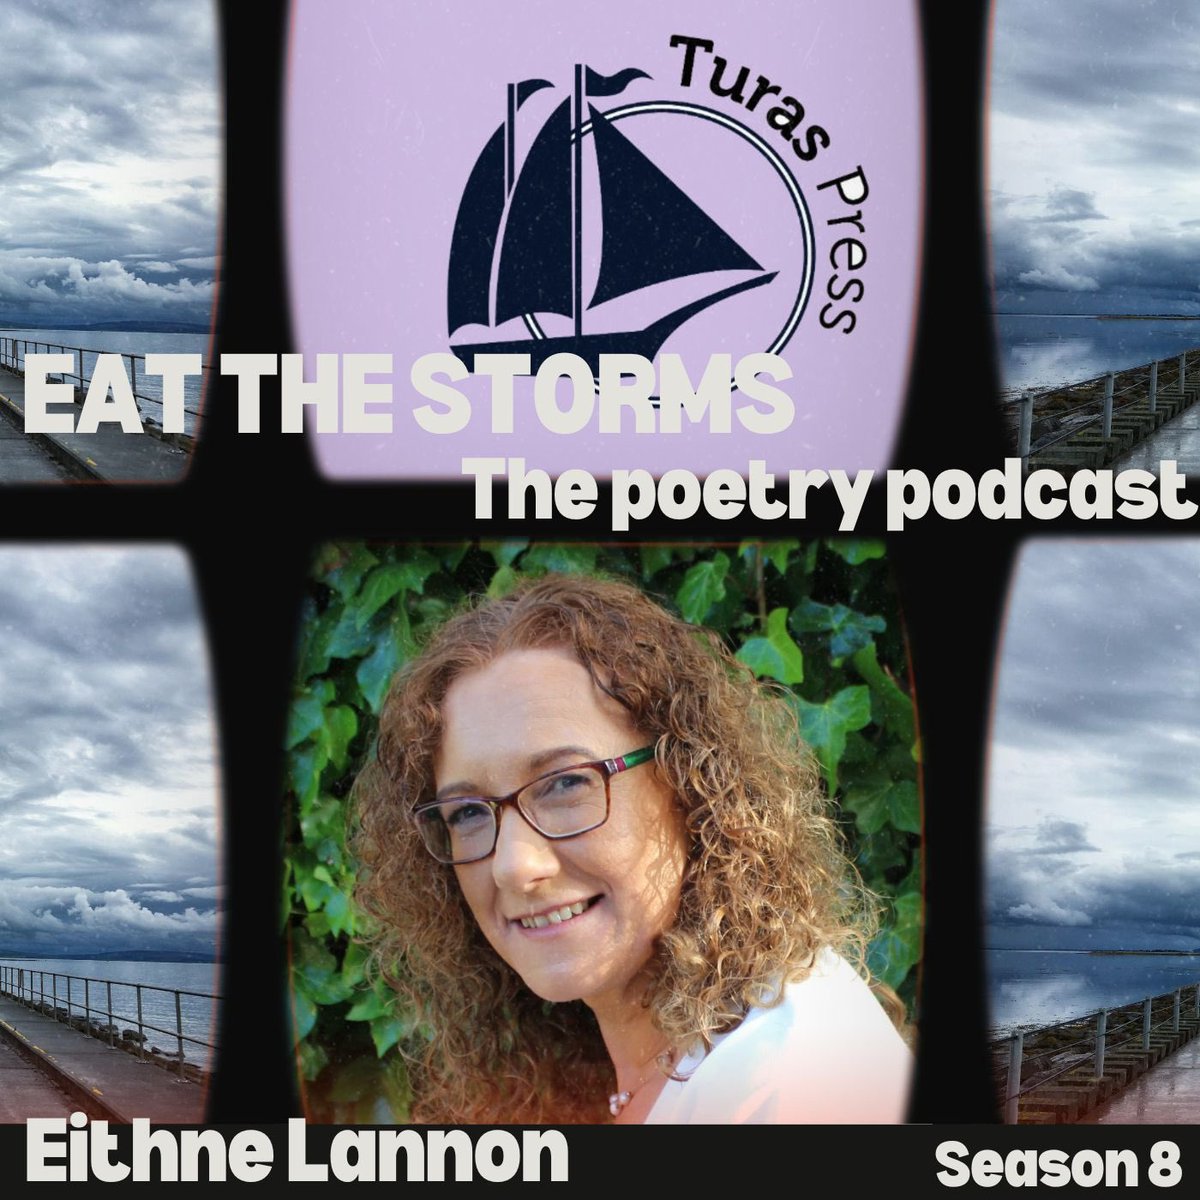 This Saturday we’ve another bumper episode of the #poetry #podcast celebrating the poets of @TurasPress Its creator @EMcSkeane will join me for 1 of 2 Behind the Storms chats this weekend & we’ll hear from Turas poets including @arimaitch @EithneLannon From 5pm Saturday